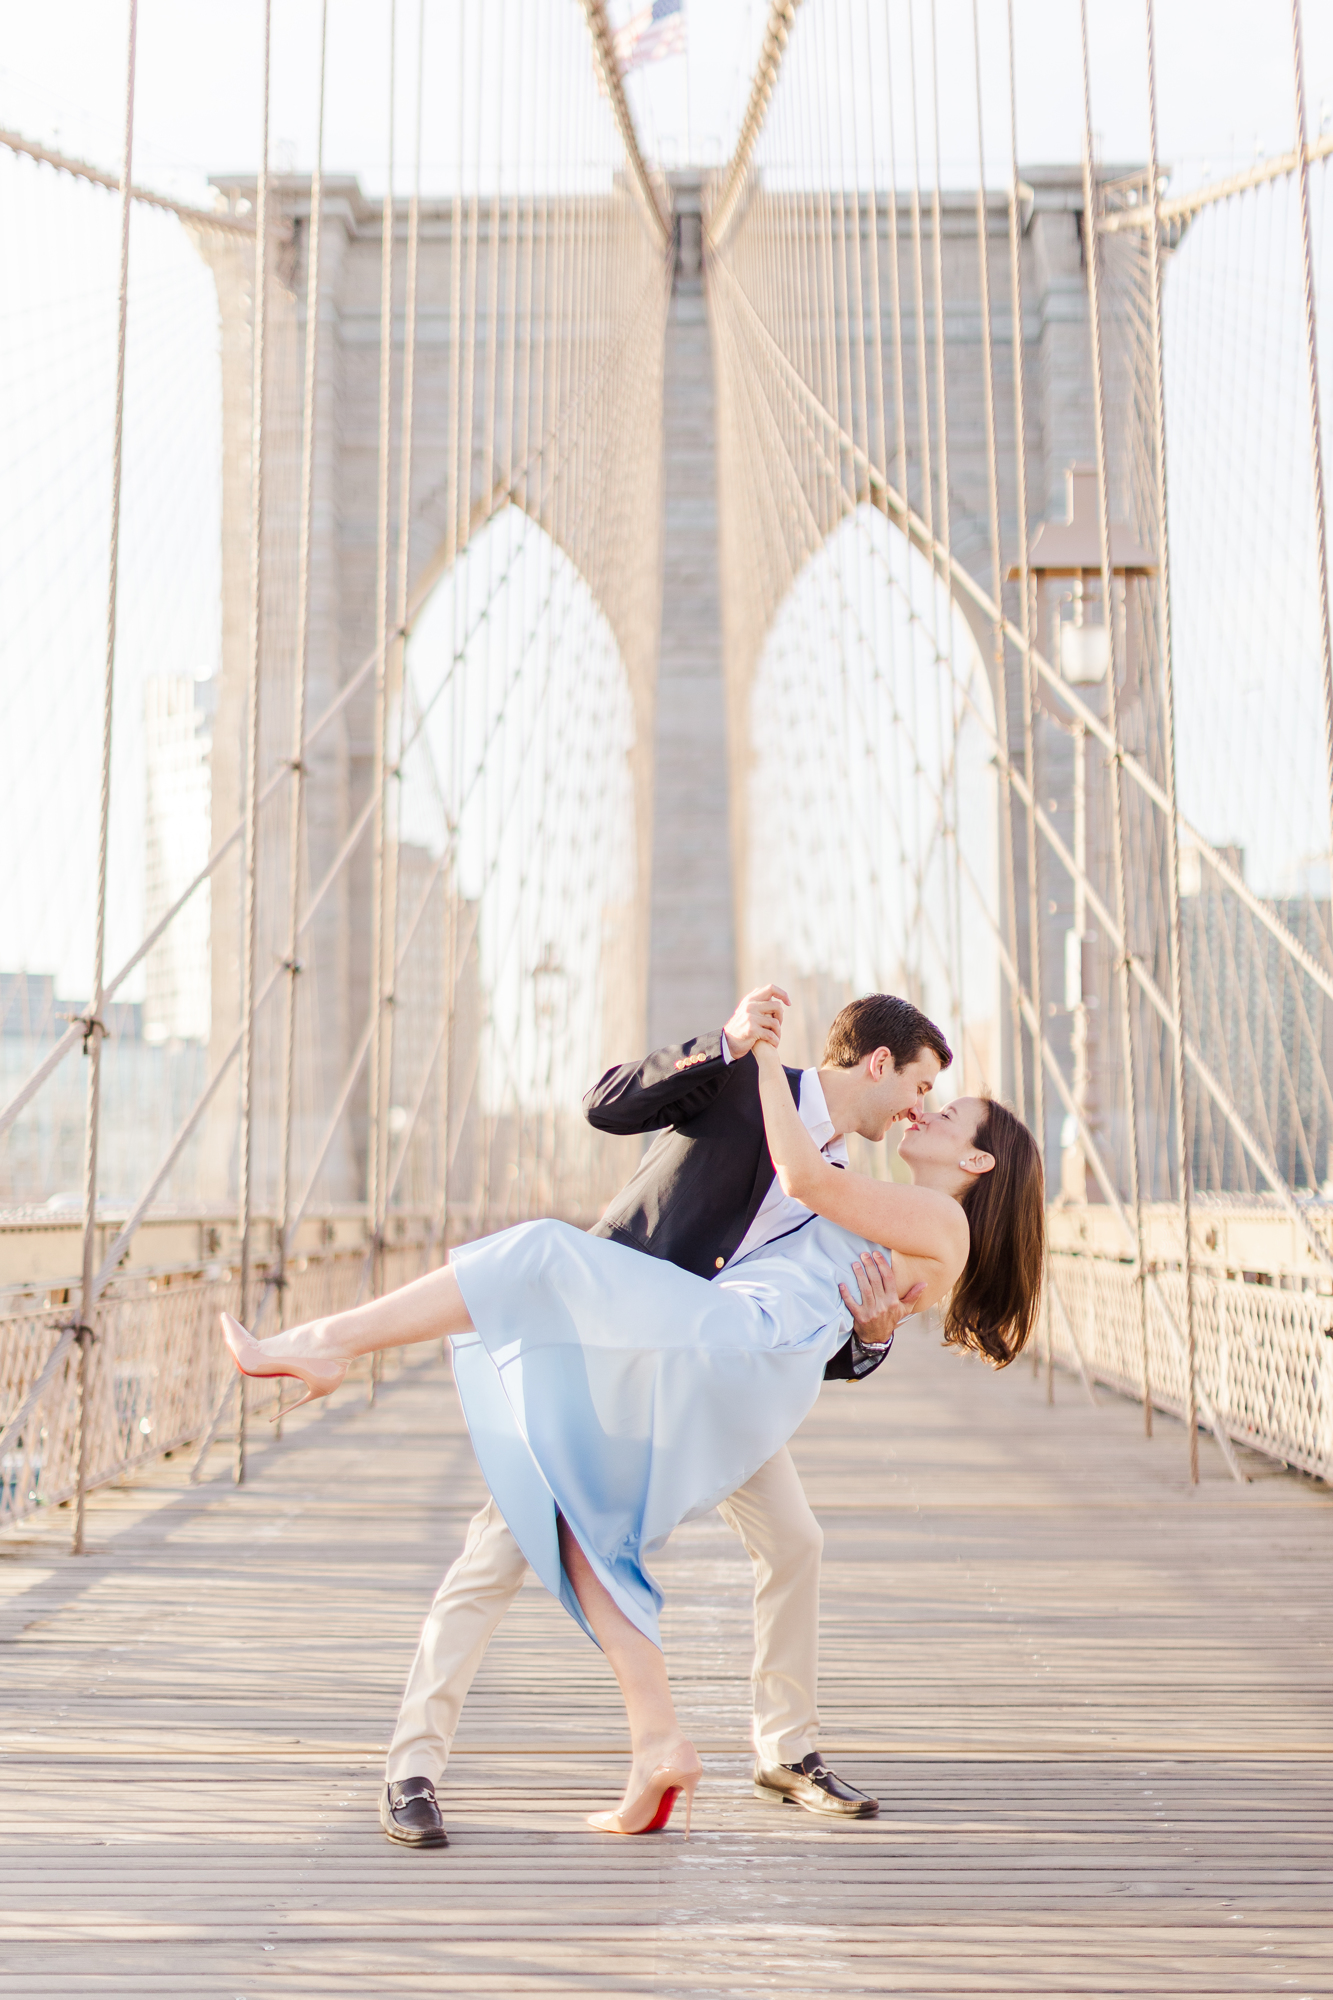 Stunning Engagement Photos in Brooklyn Heights